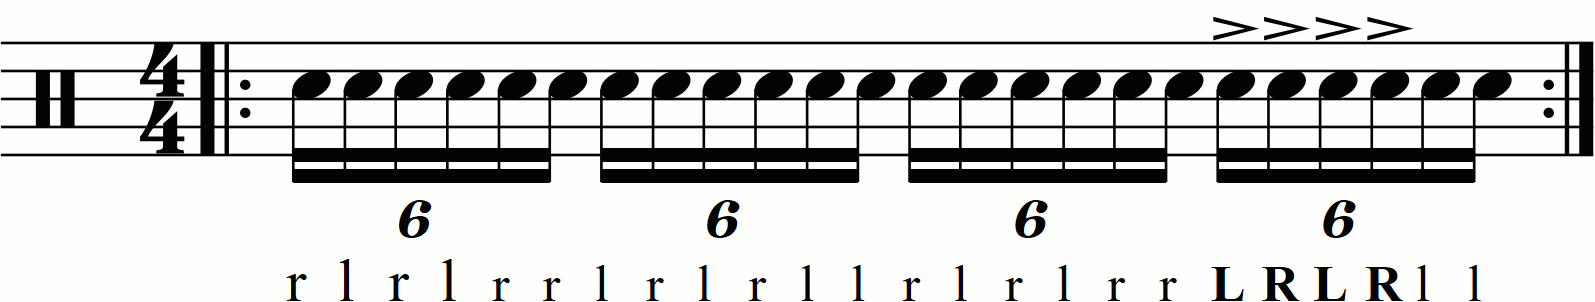 Accenting a double paradiddle